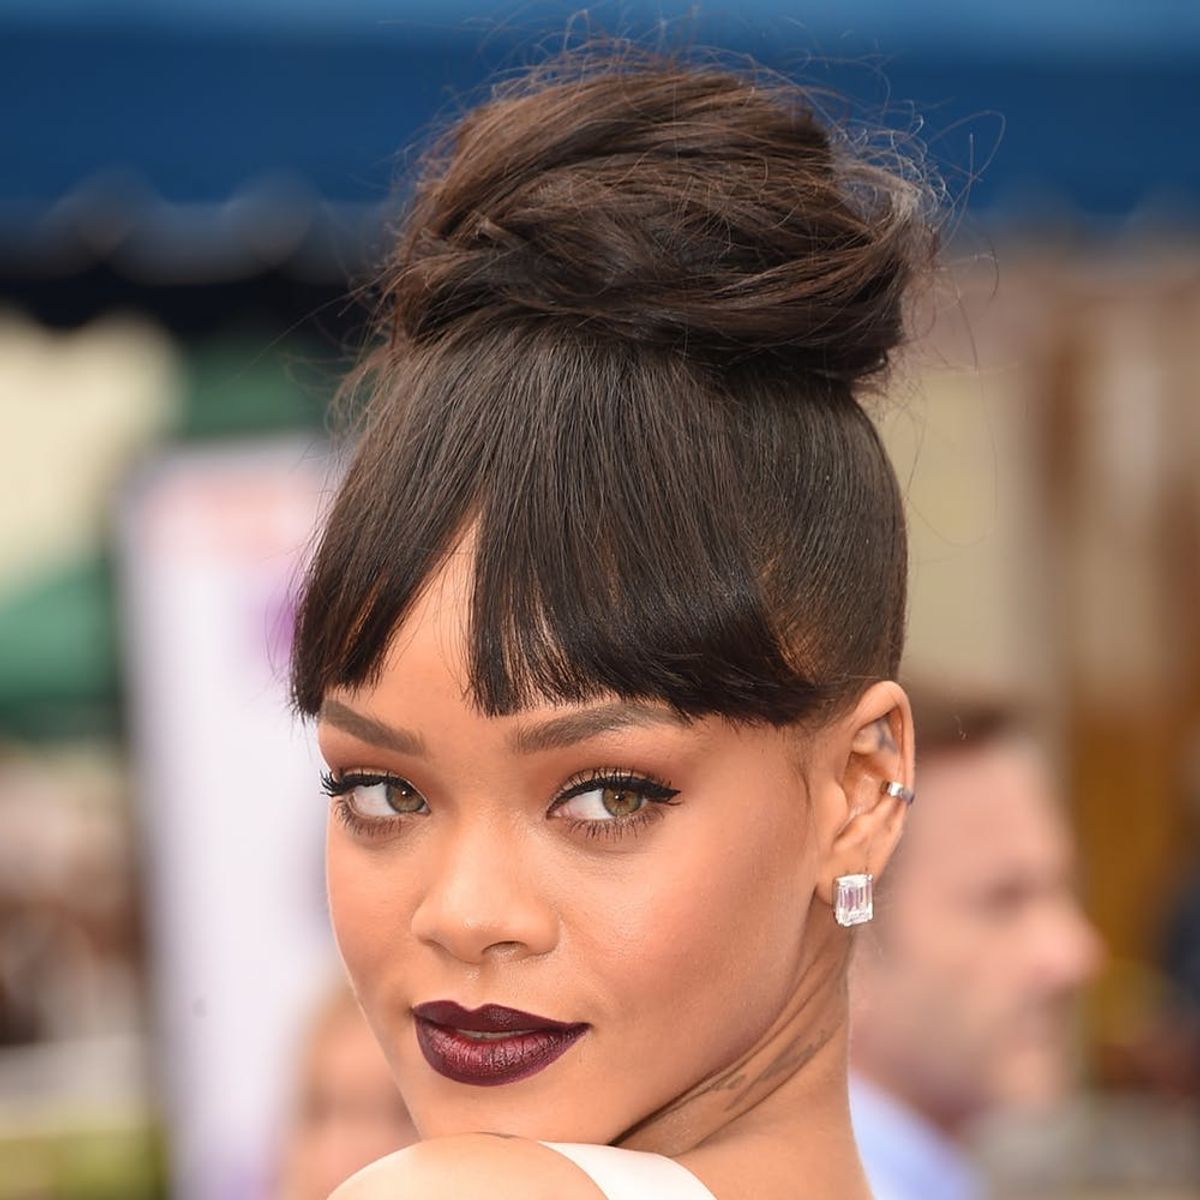 26 Sleigh-Worthy Winter Wedding Hairstyles Spotted on the Red Carpet